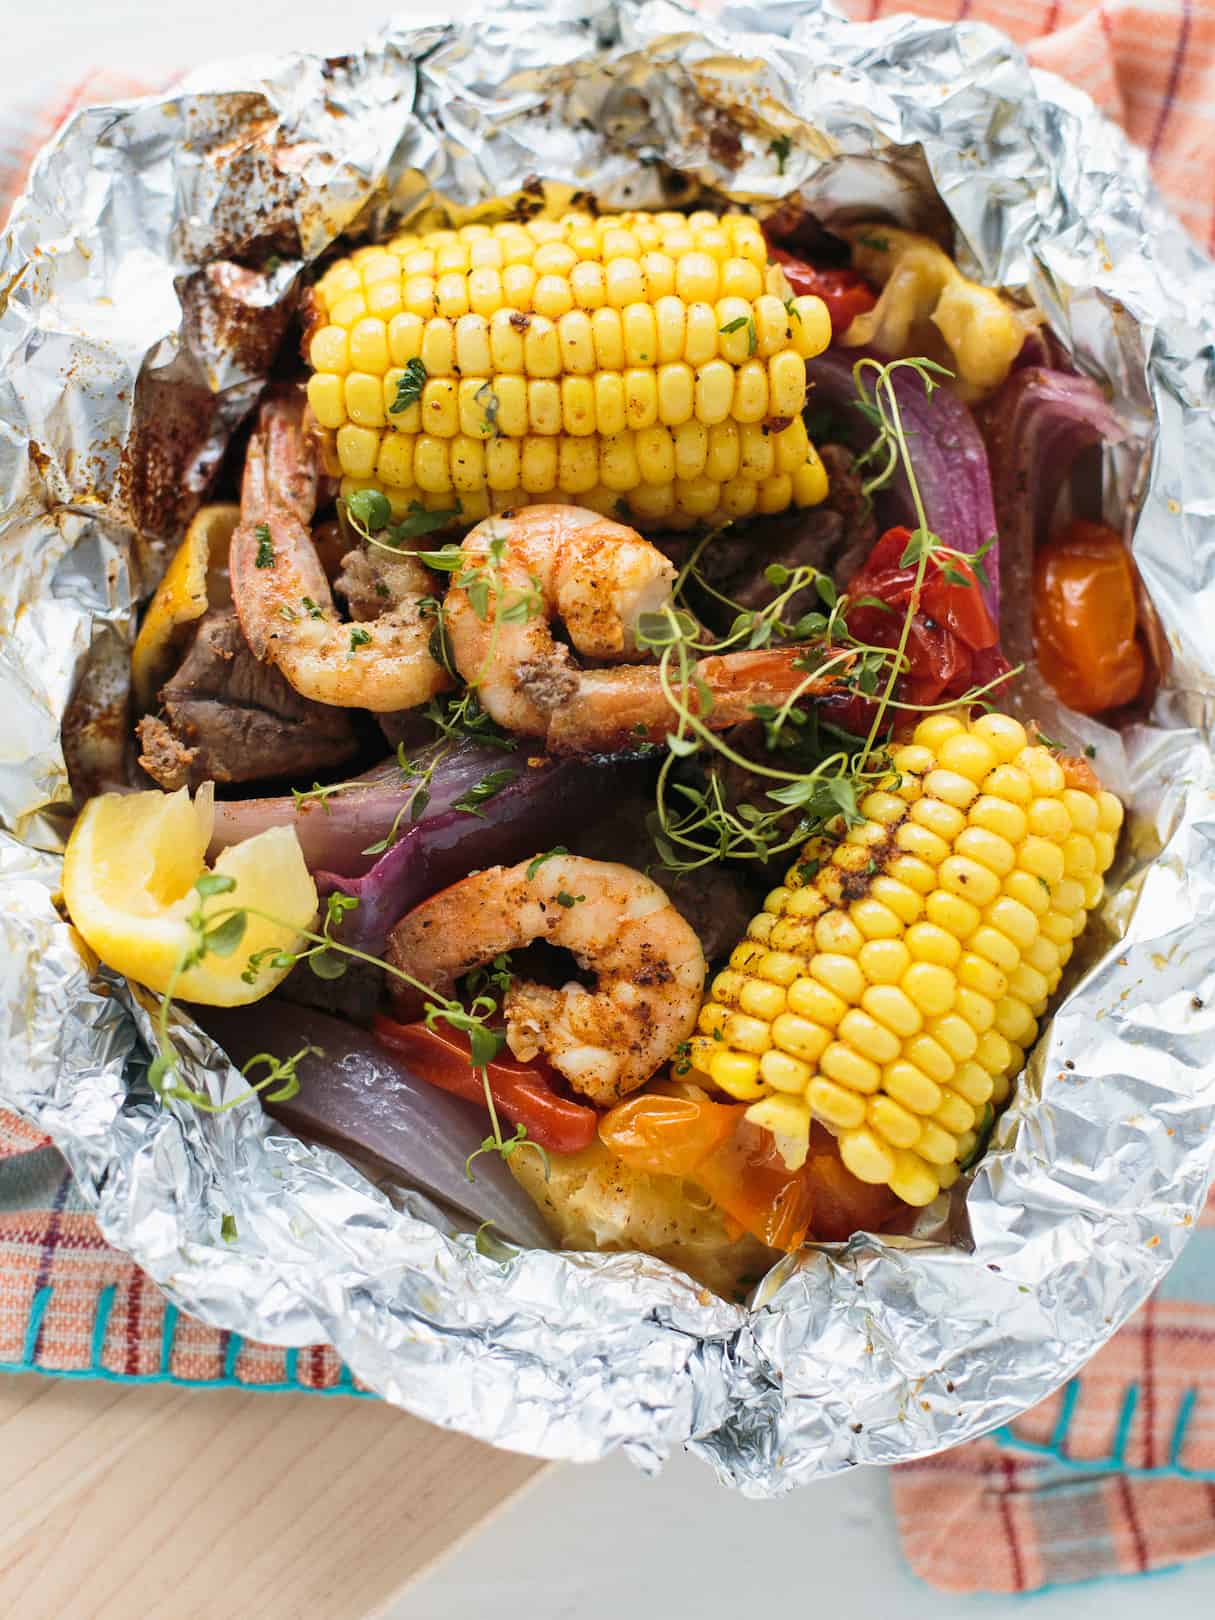 Image of delicious grilled corn, succulent shrimp, and fresh vegetables wrapped in foil